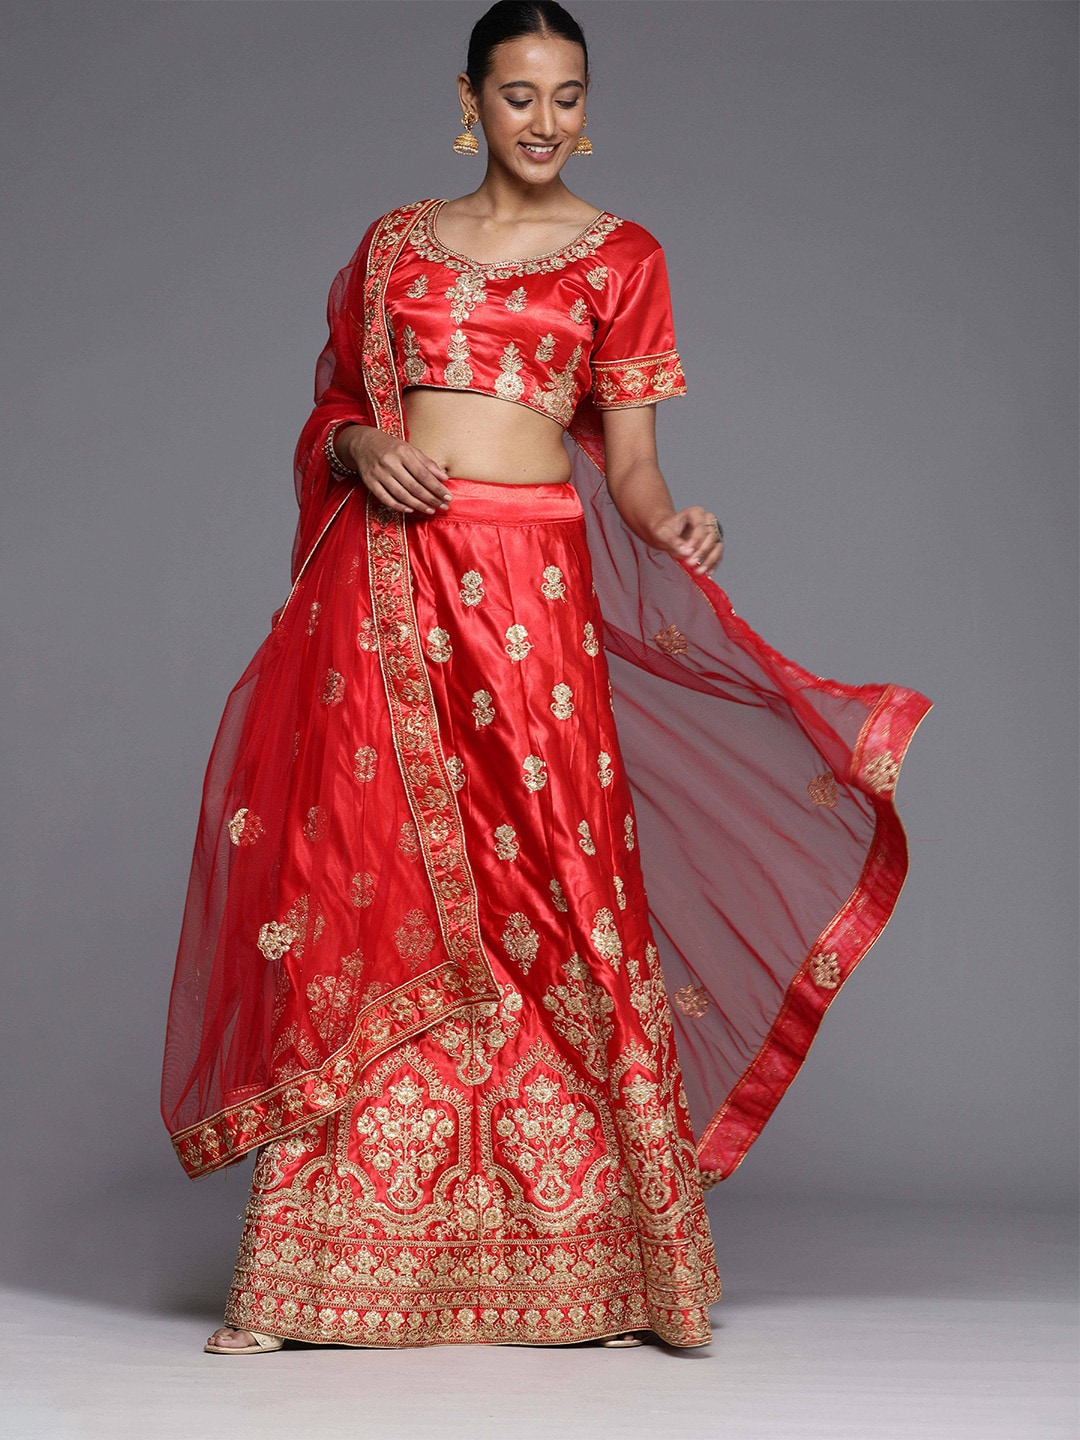 MANVAA Embellished Semi-Stitched Lehenga & Unstitched Blouse With Dupatta Price in India